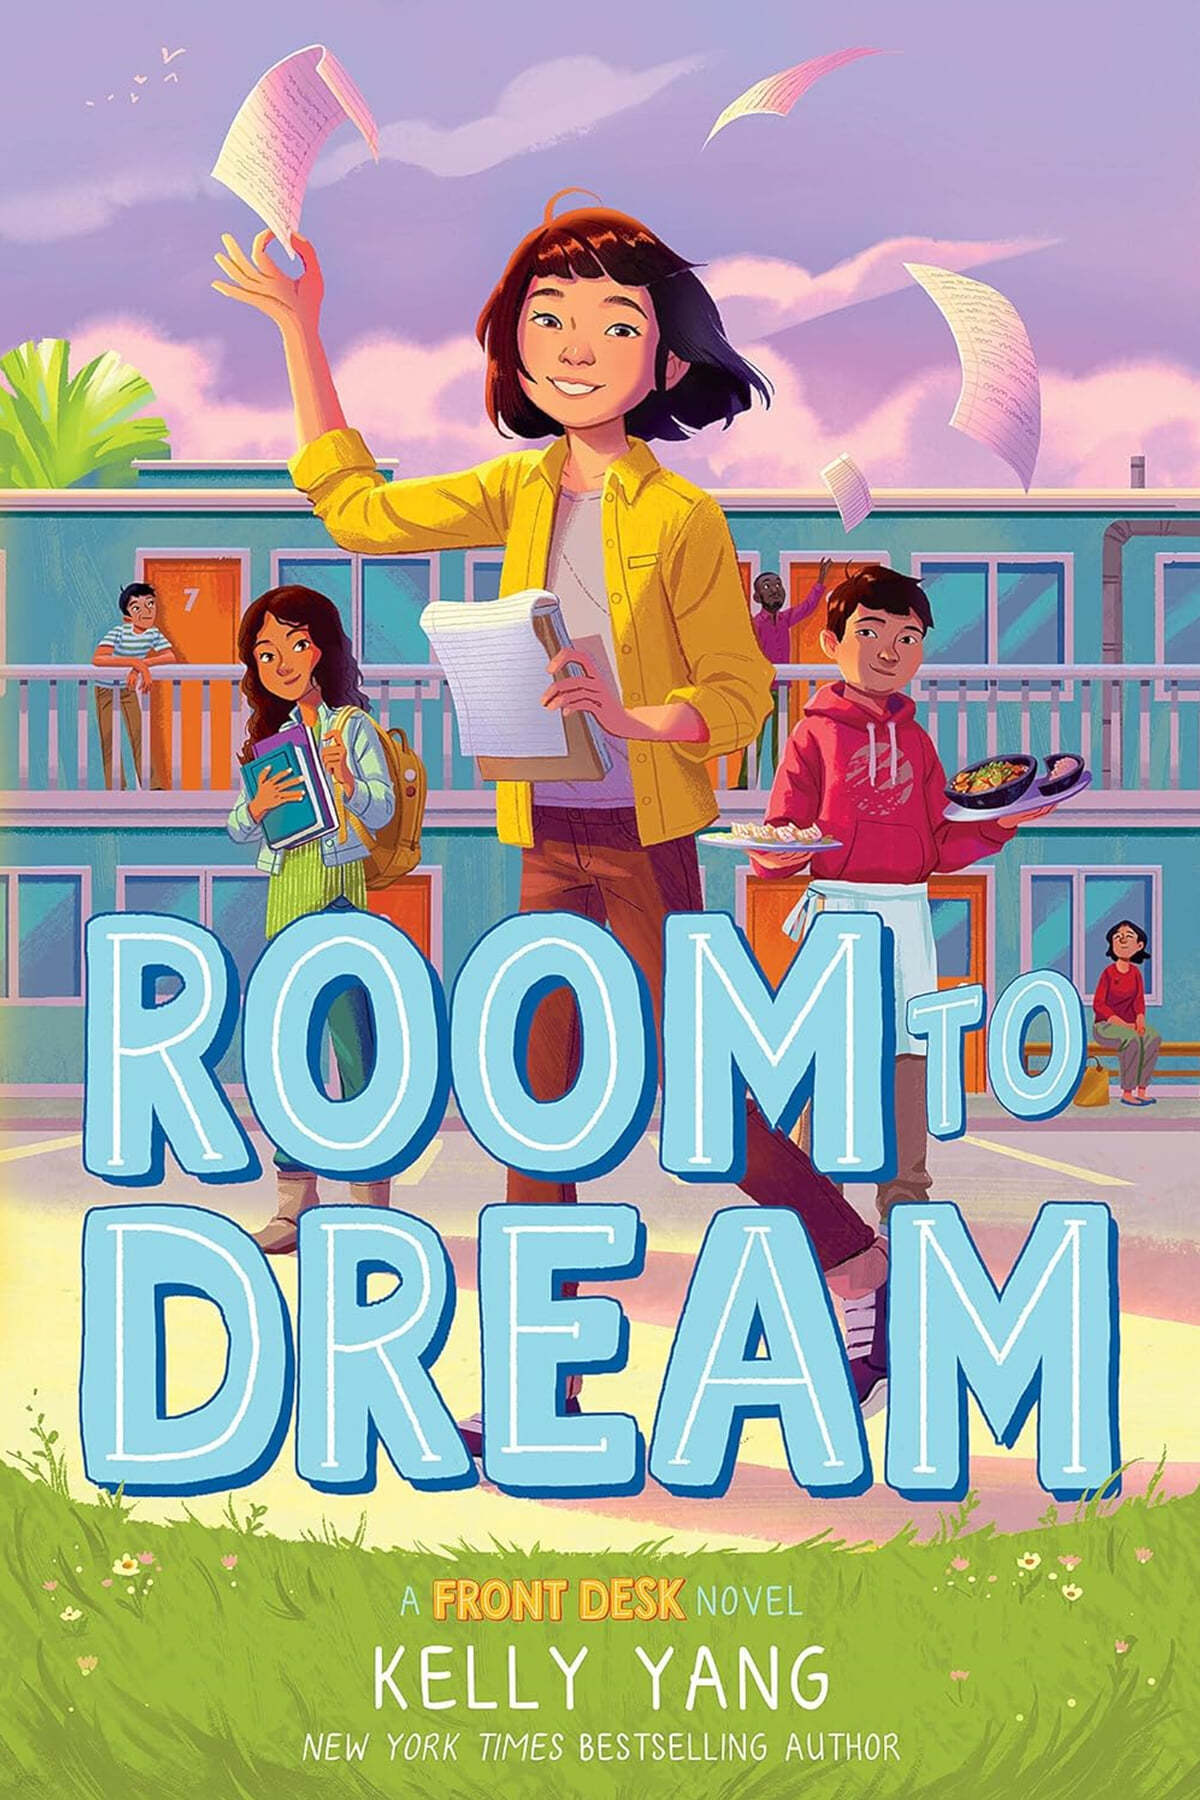 Room To Dream